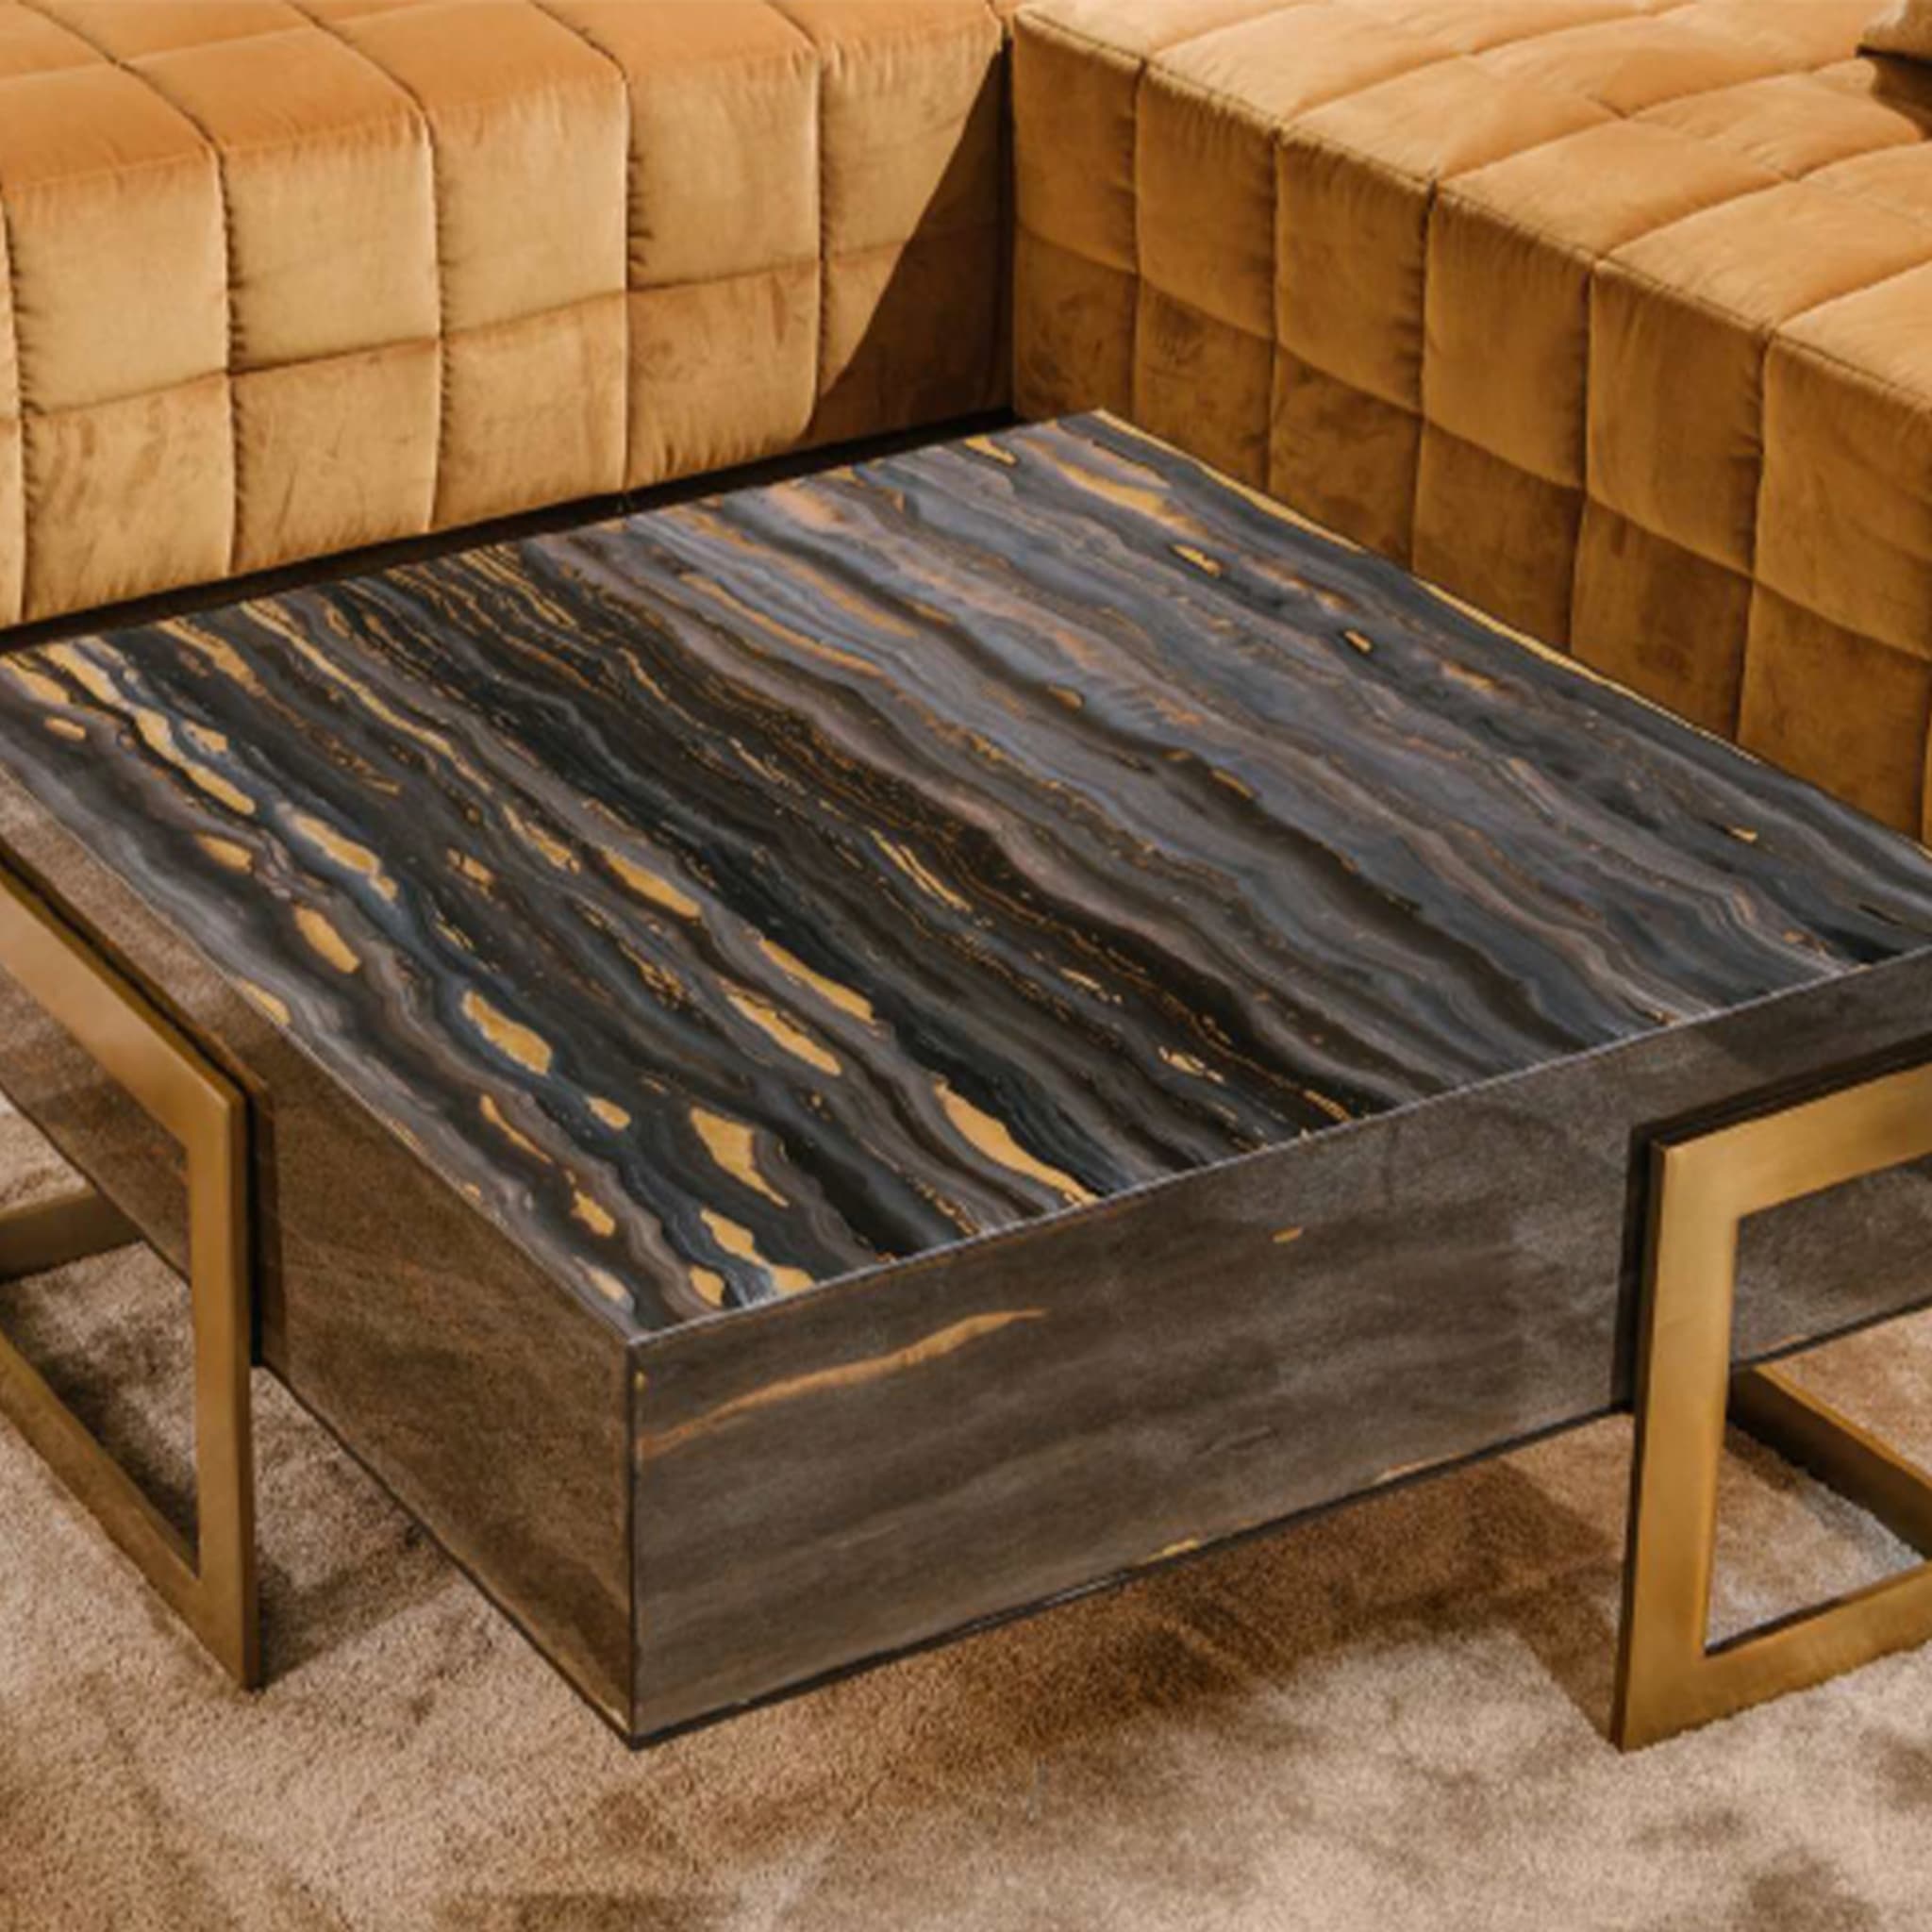 Holbrook Coffee Table by Giannella Ventura - Alternative view 3